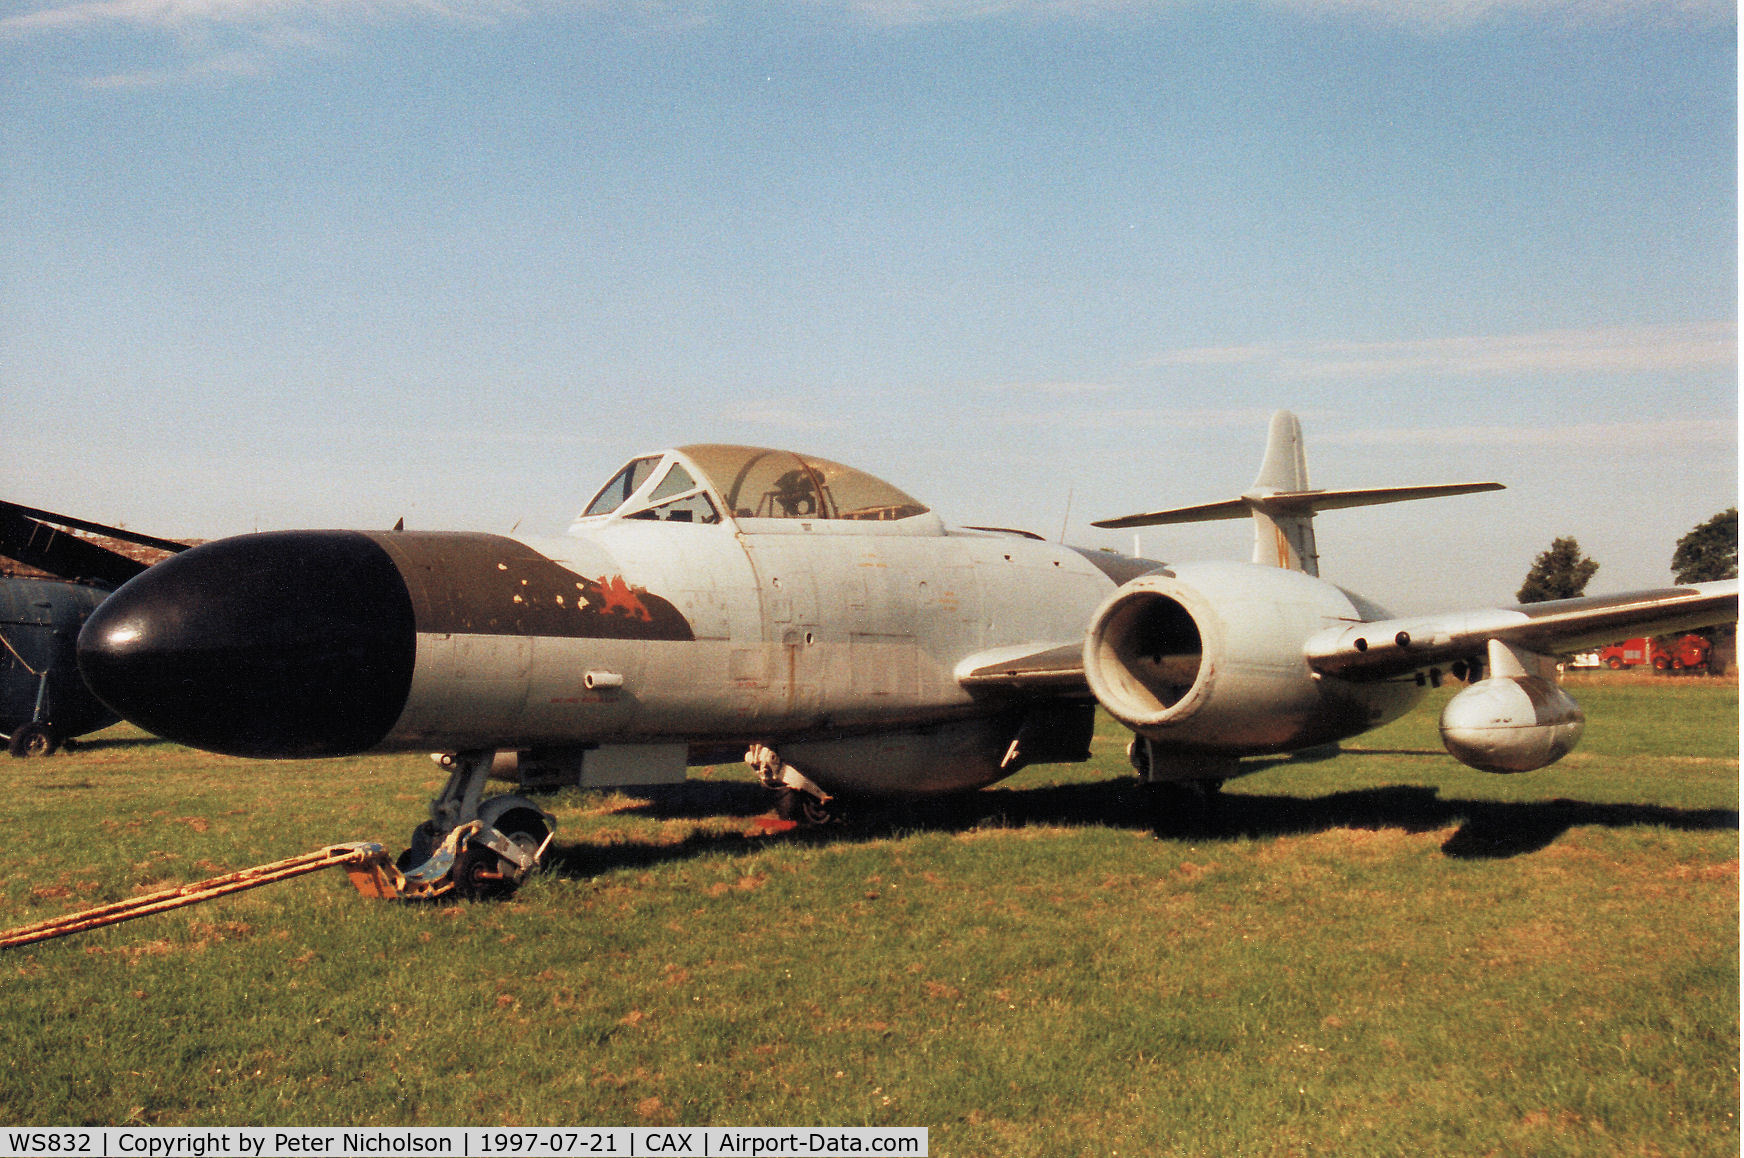 WS832, 1954 Gloster Meteor NF.14 C/N Not found WS832, The Solway Aviation Museum's Meteor NF.14 as seen in the Summer of 1997.